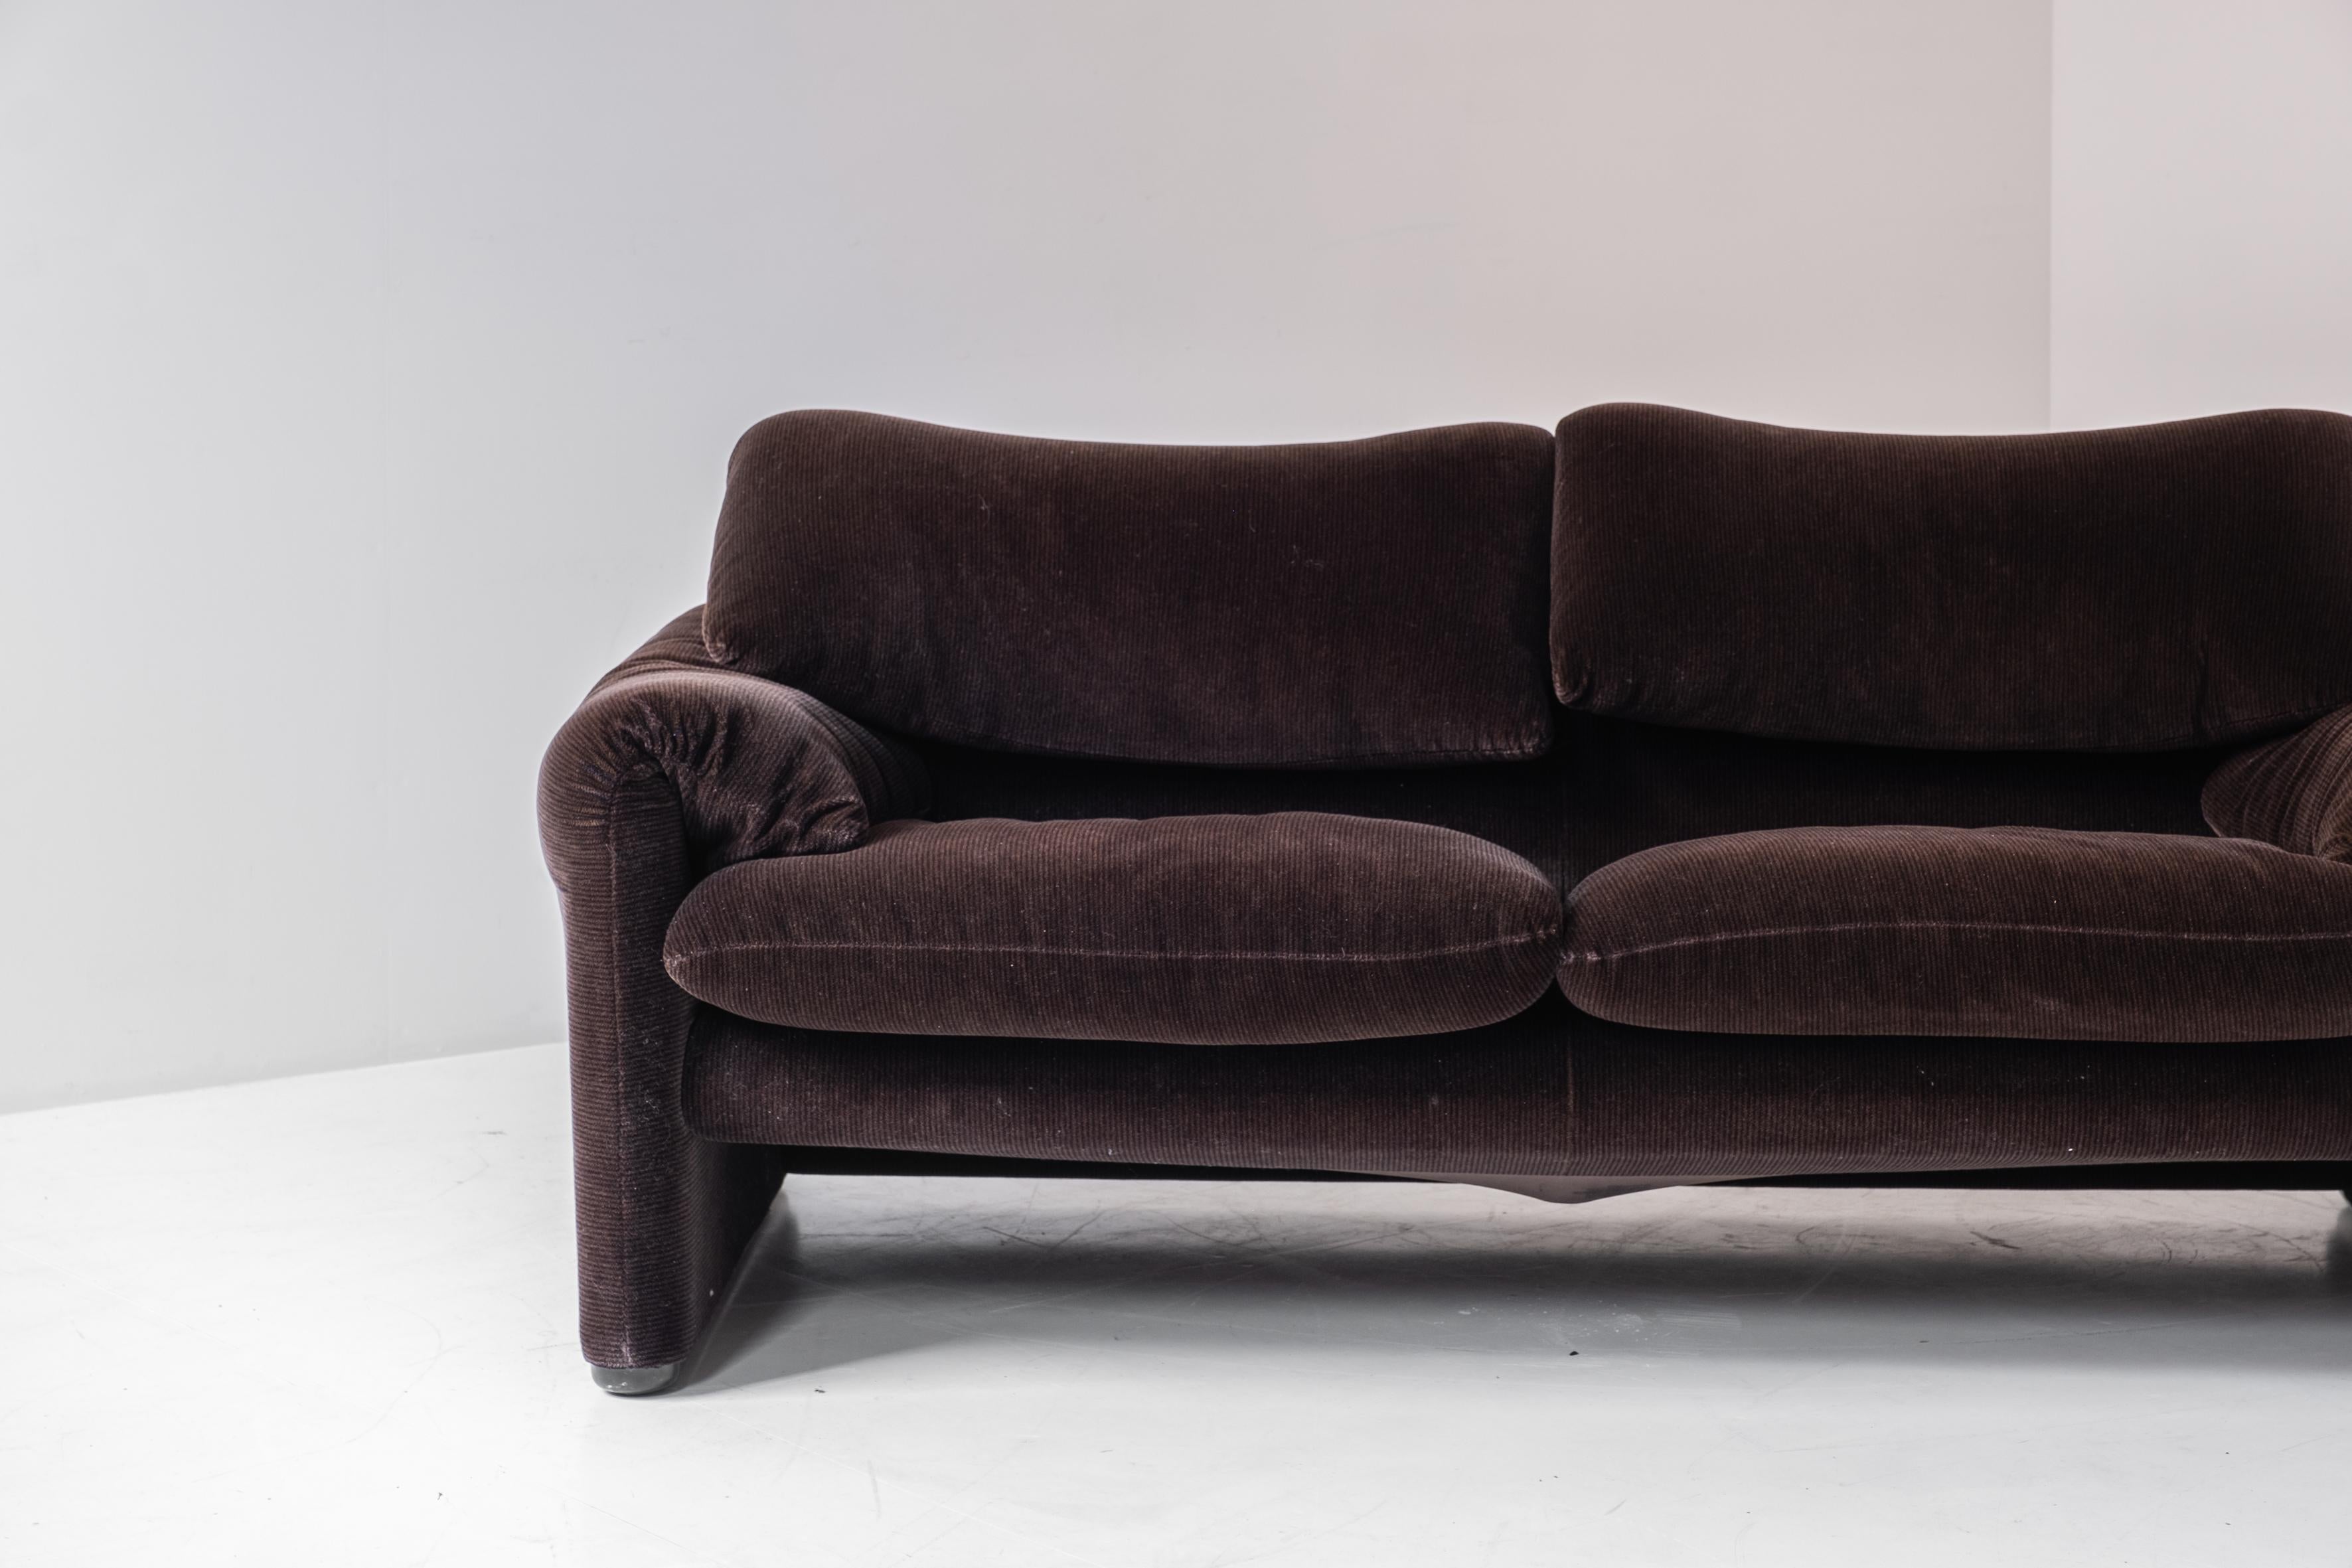 Late 20th Century Maralunga two-seater by Vico Magistretti for Cassina, Italy 1970s.